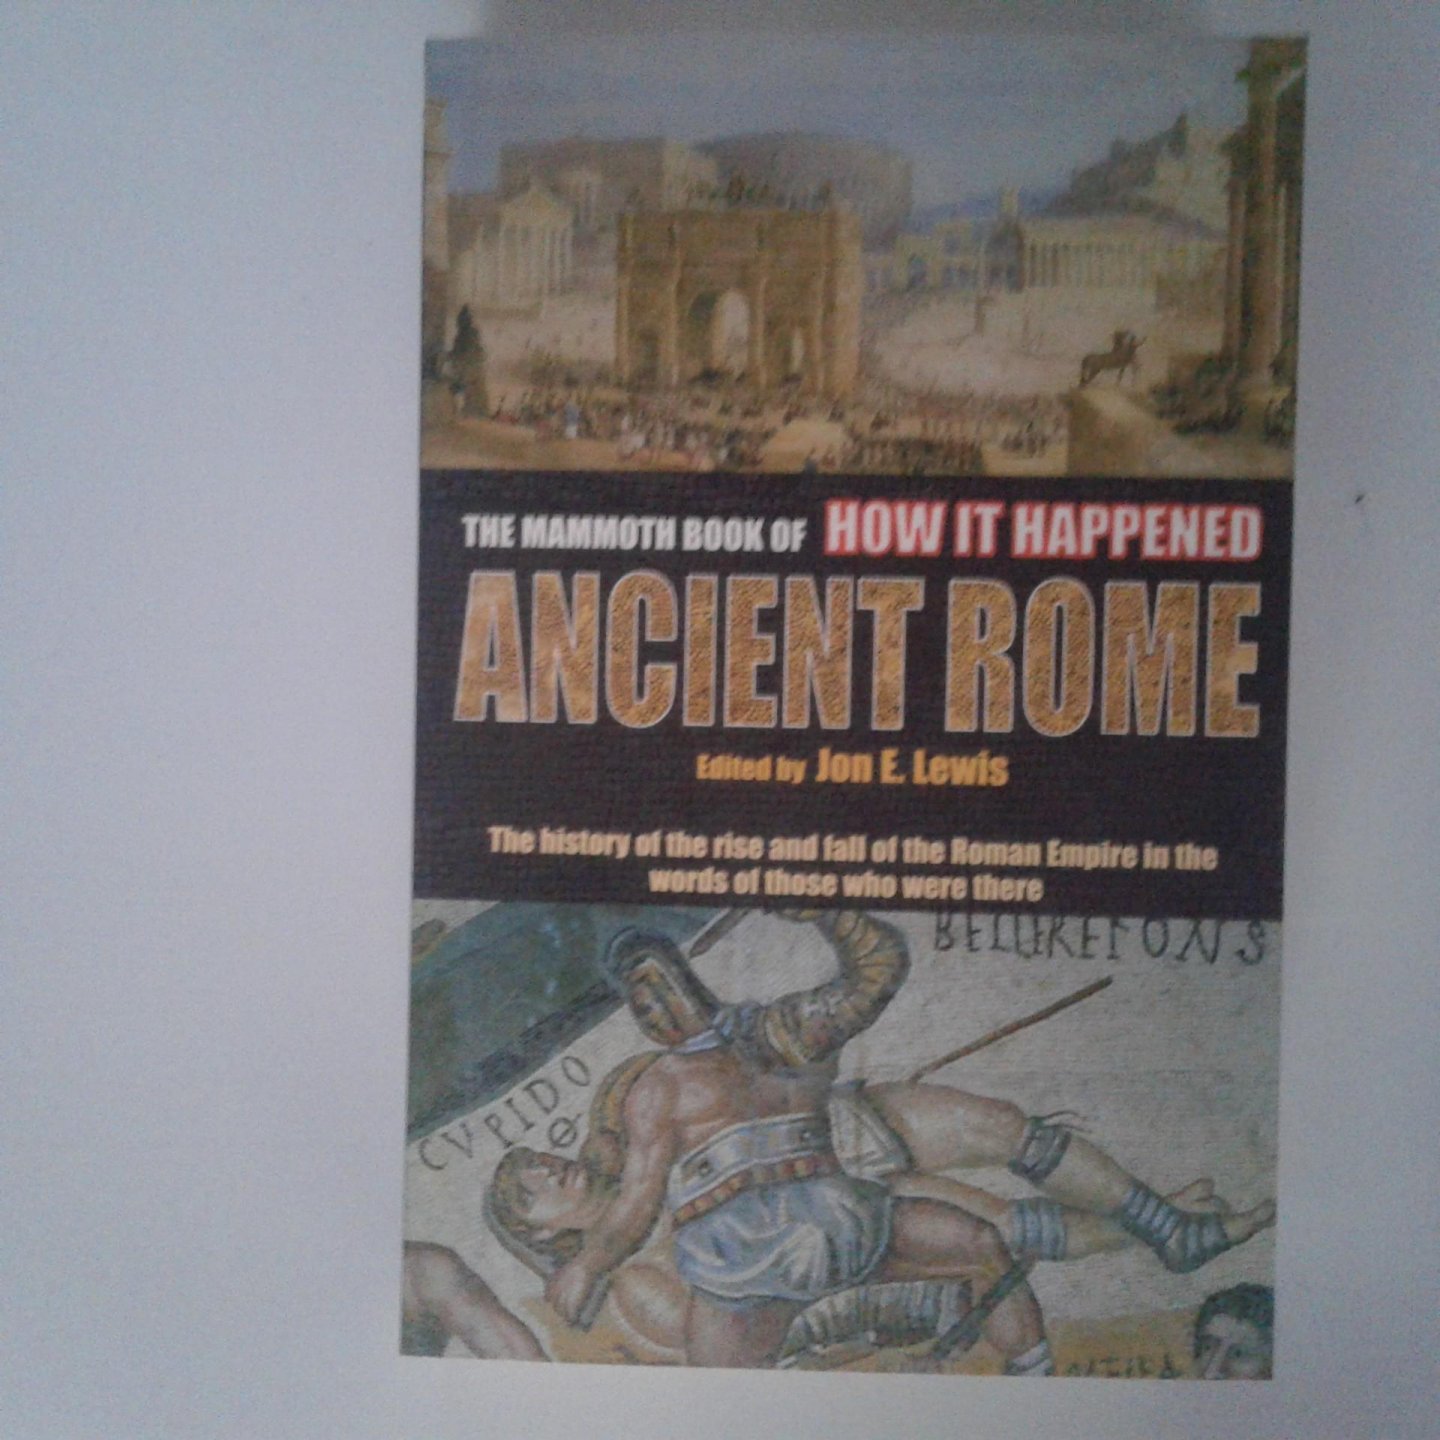 Lewis, Ion E. - Ancient Rome ; The Mammoth Book of How it Happened